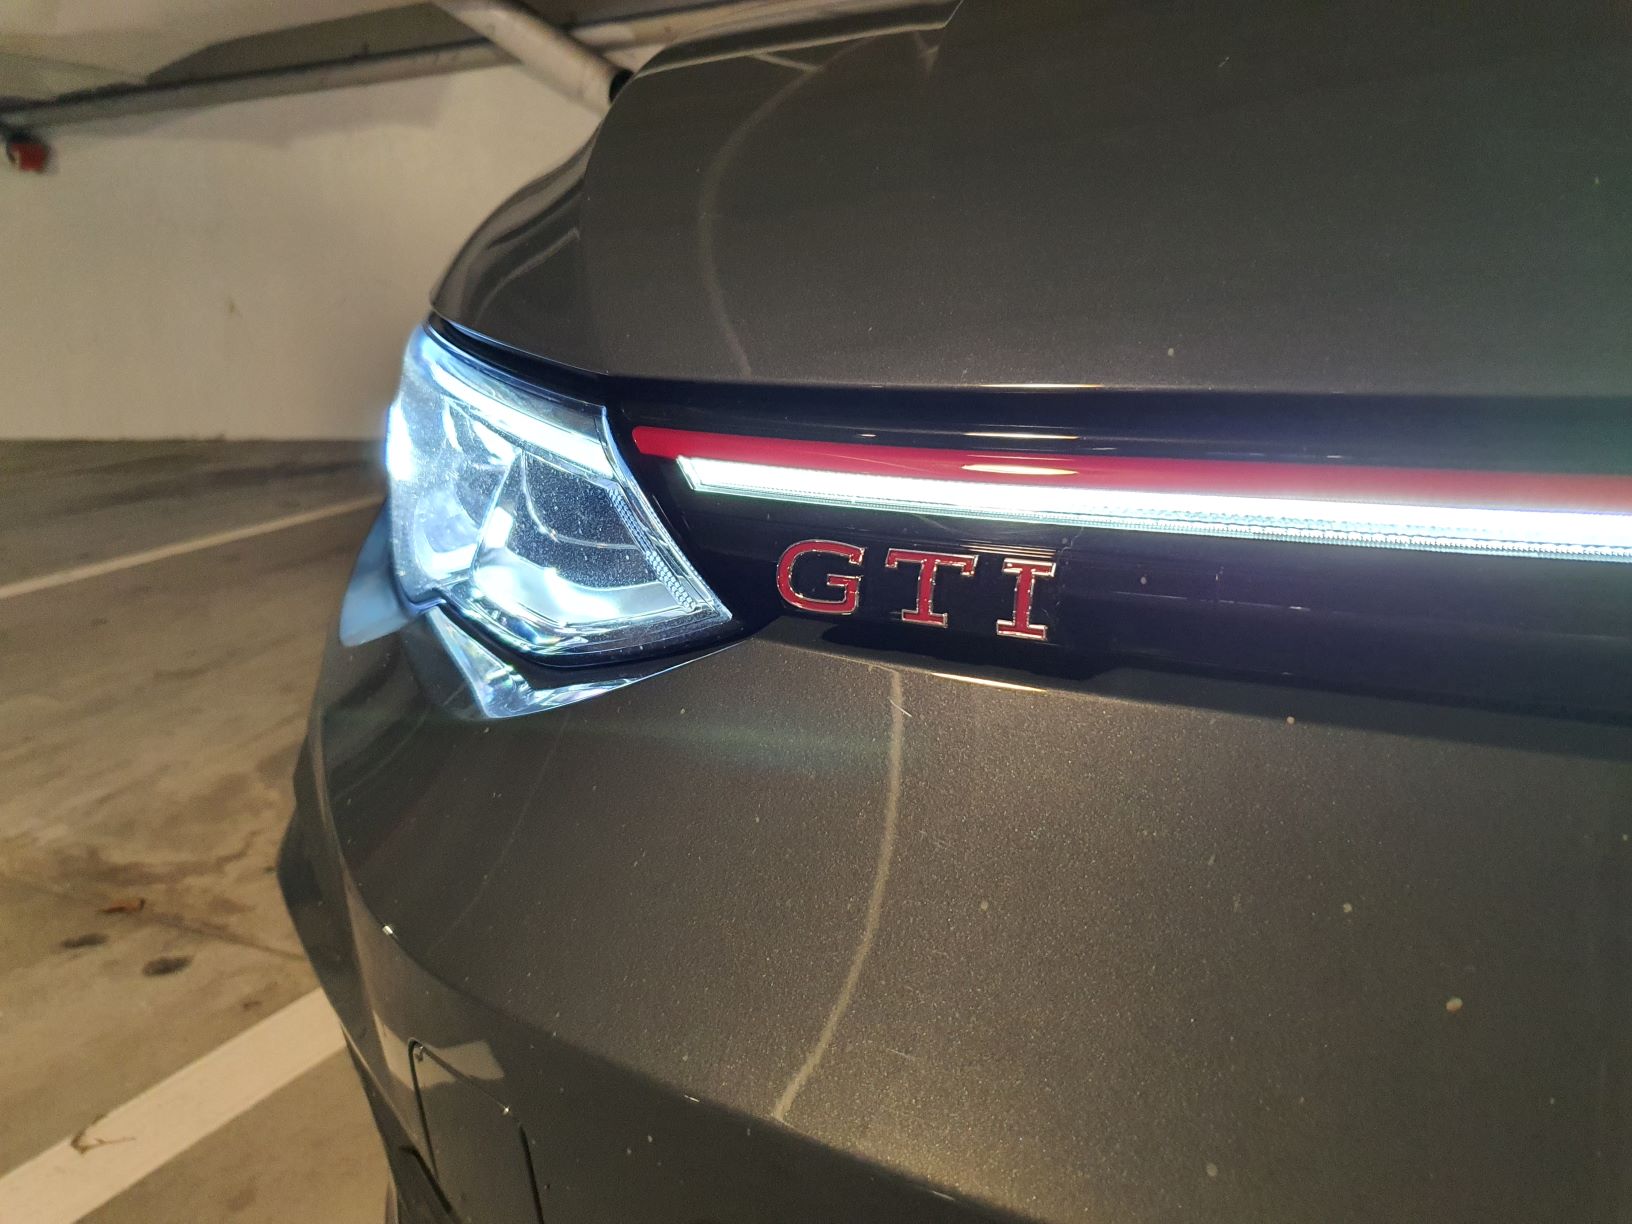 Iconic GTI bade on the MK8 Golf GTI